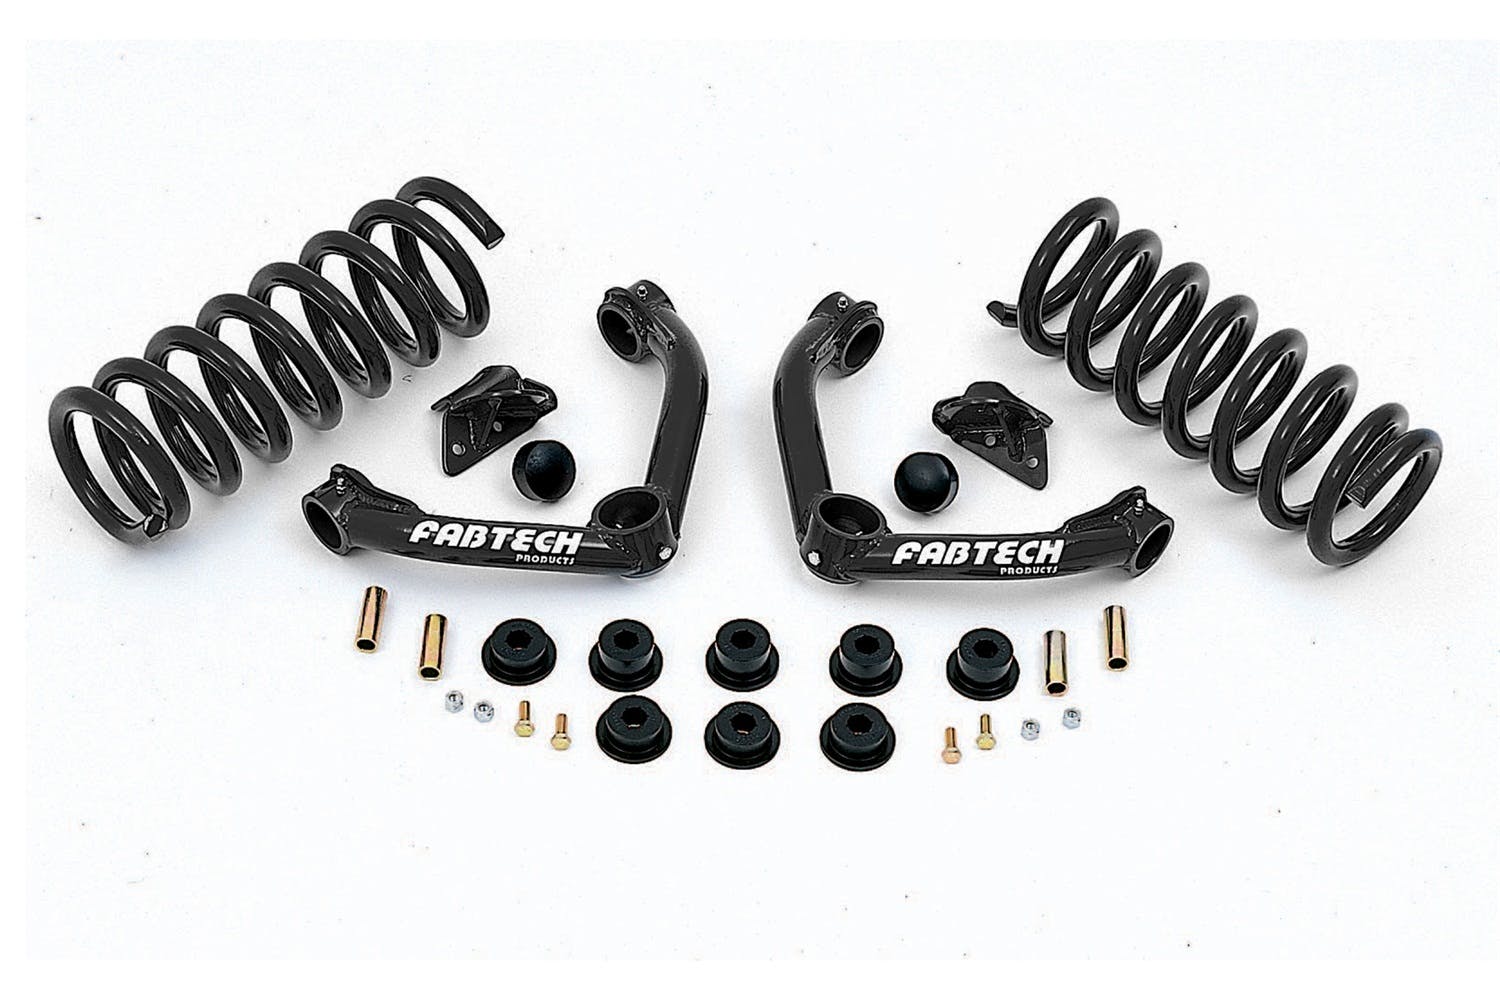 Fabtech K2109 2.5in. PERF SYS W/PERF SHKS 98-08 FORD RANGER 2WD COIL SPRING FRT SUSP W/4.0L V6